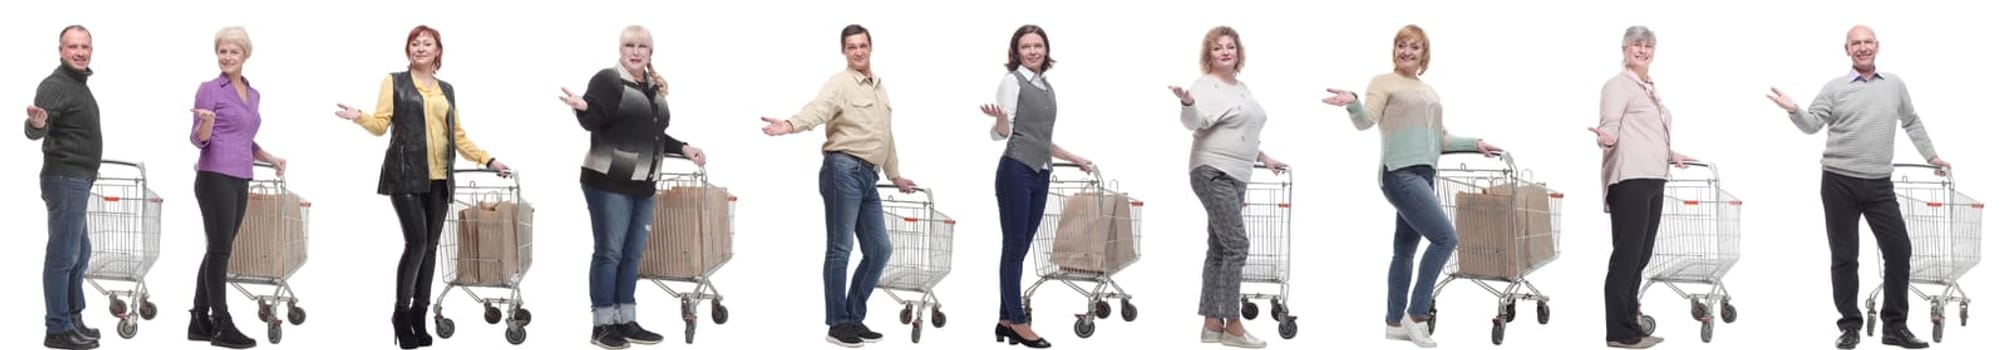 group of people with cart and outstretched hand